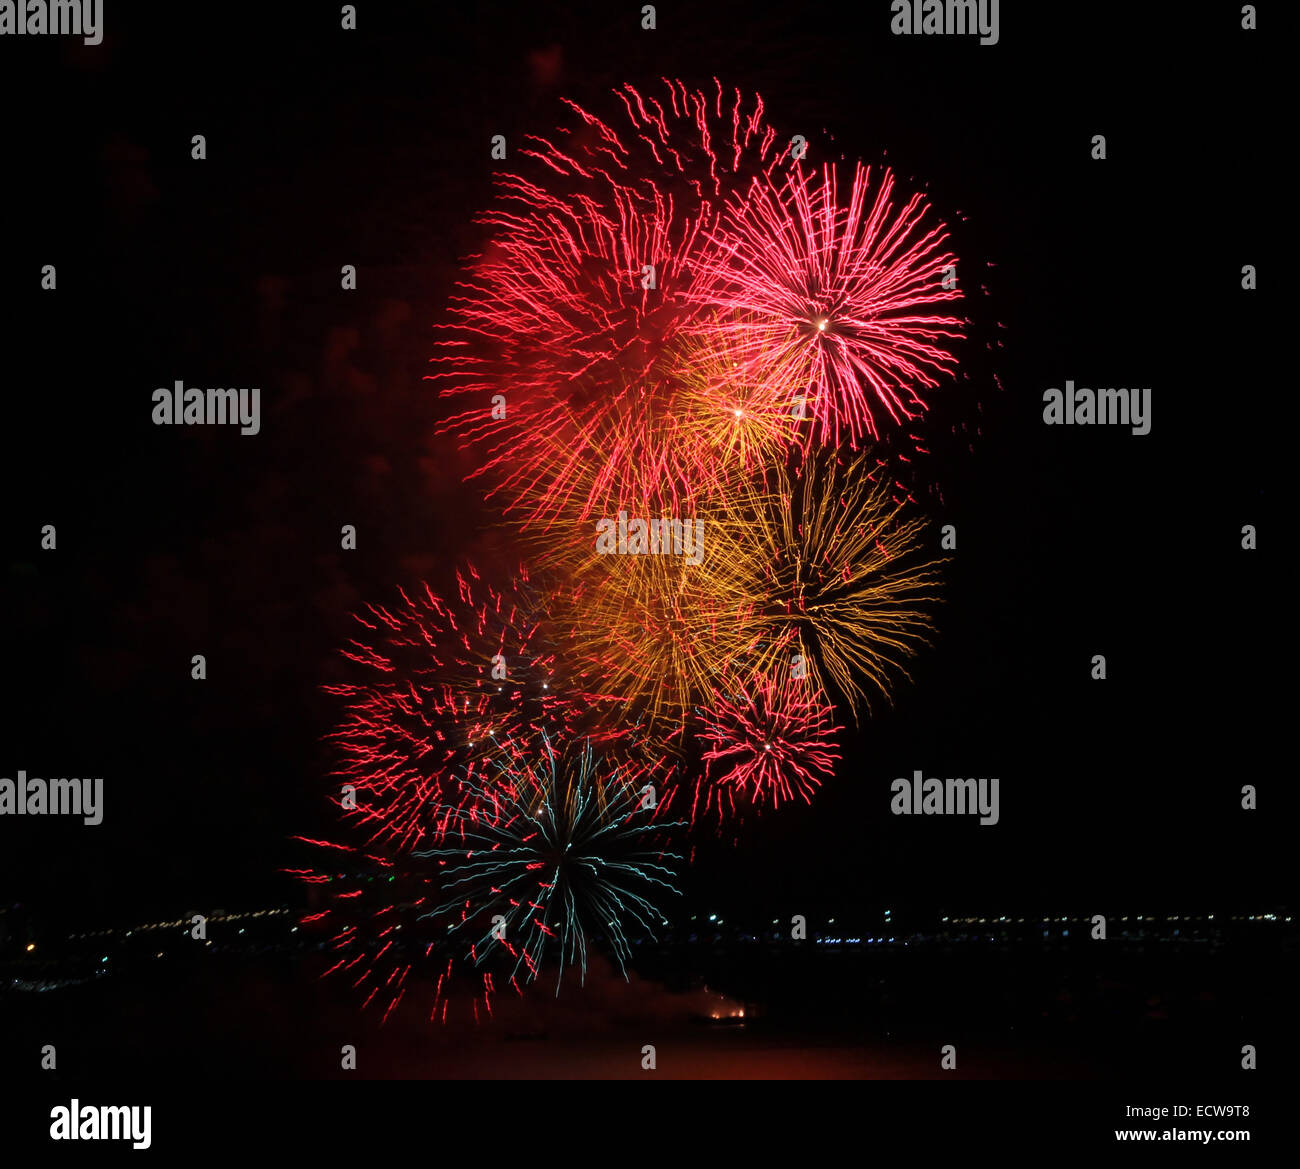 Close-up of a multi-colored fireworks display symbolizing New Year, celebration and pyrotechnics Stock Photo